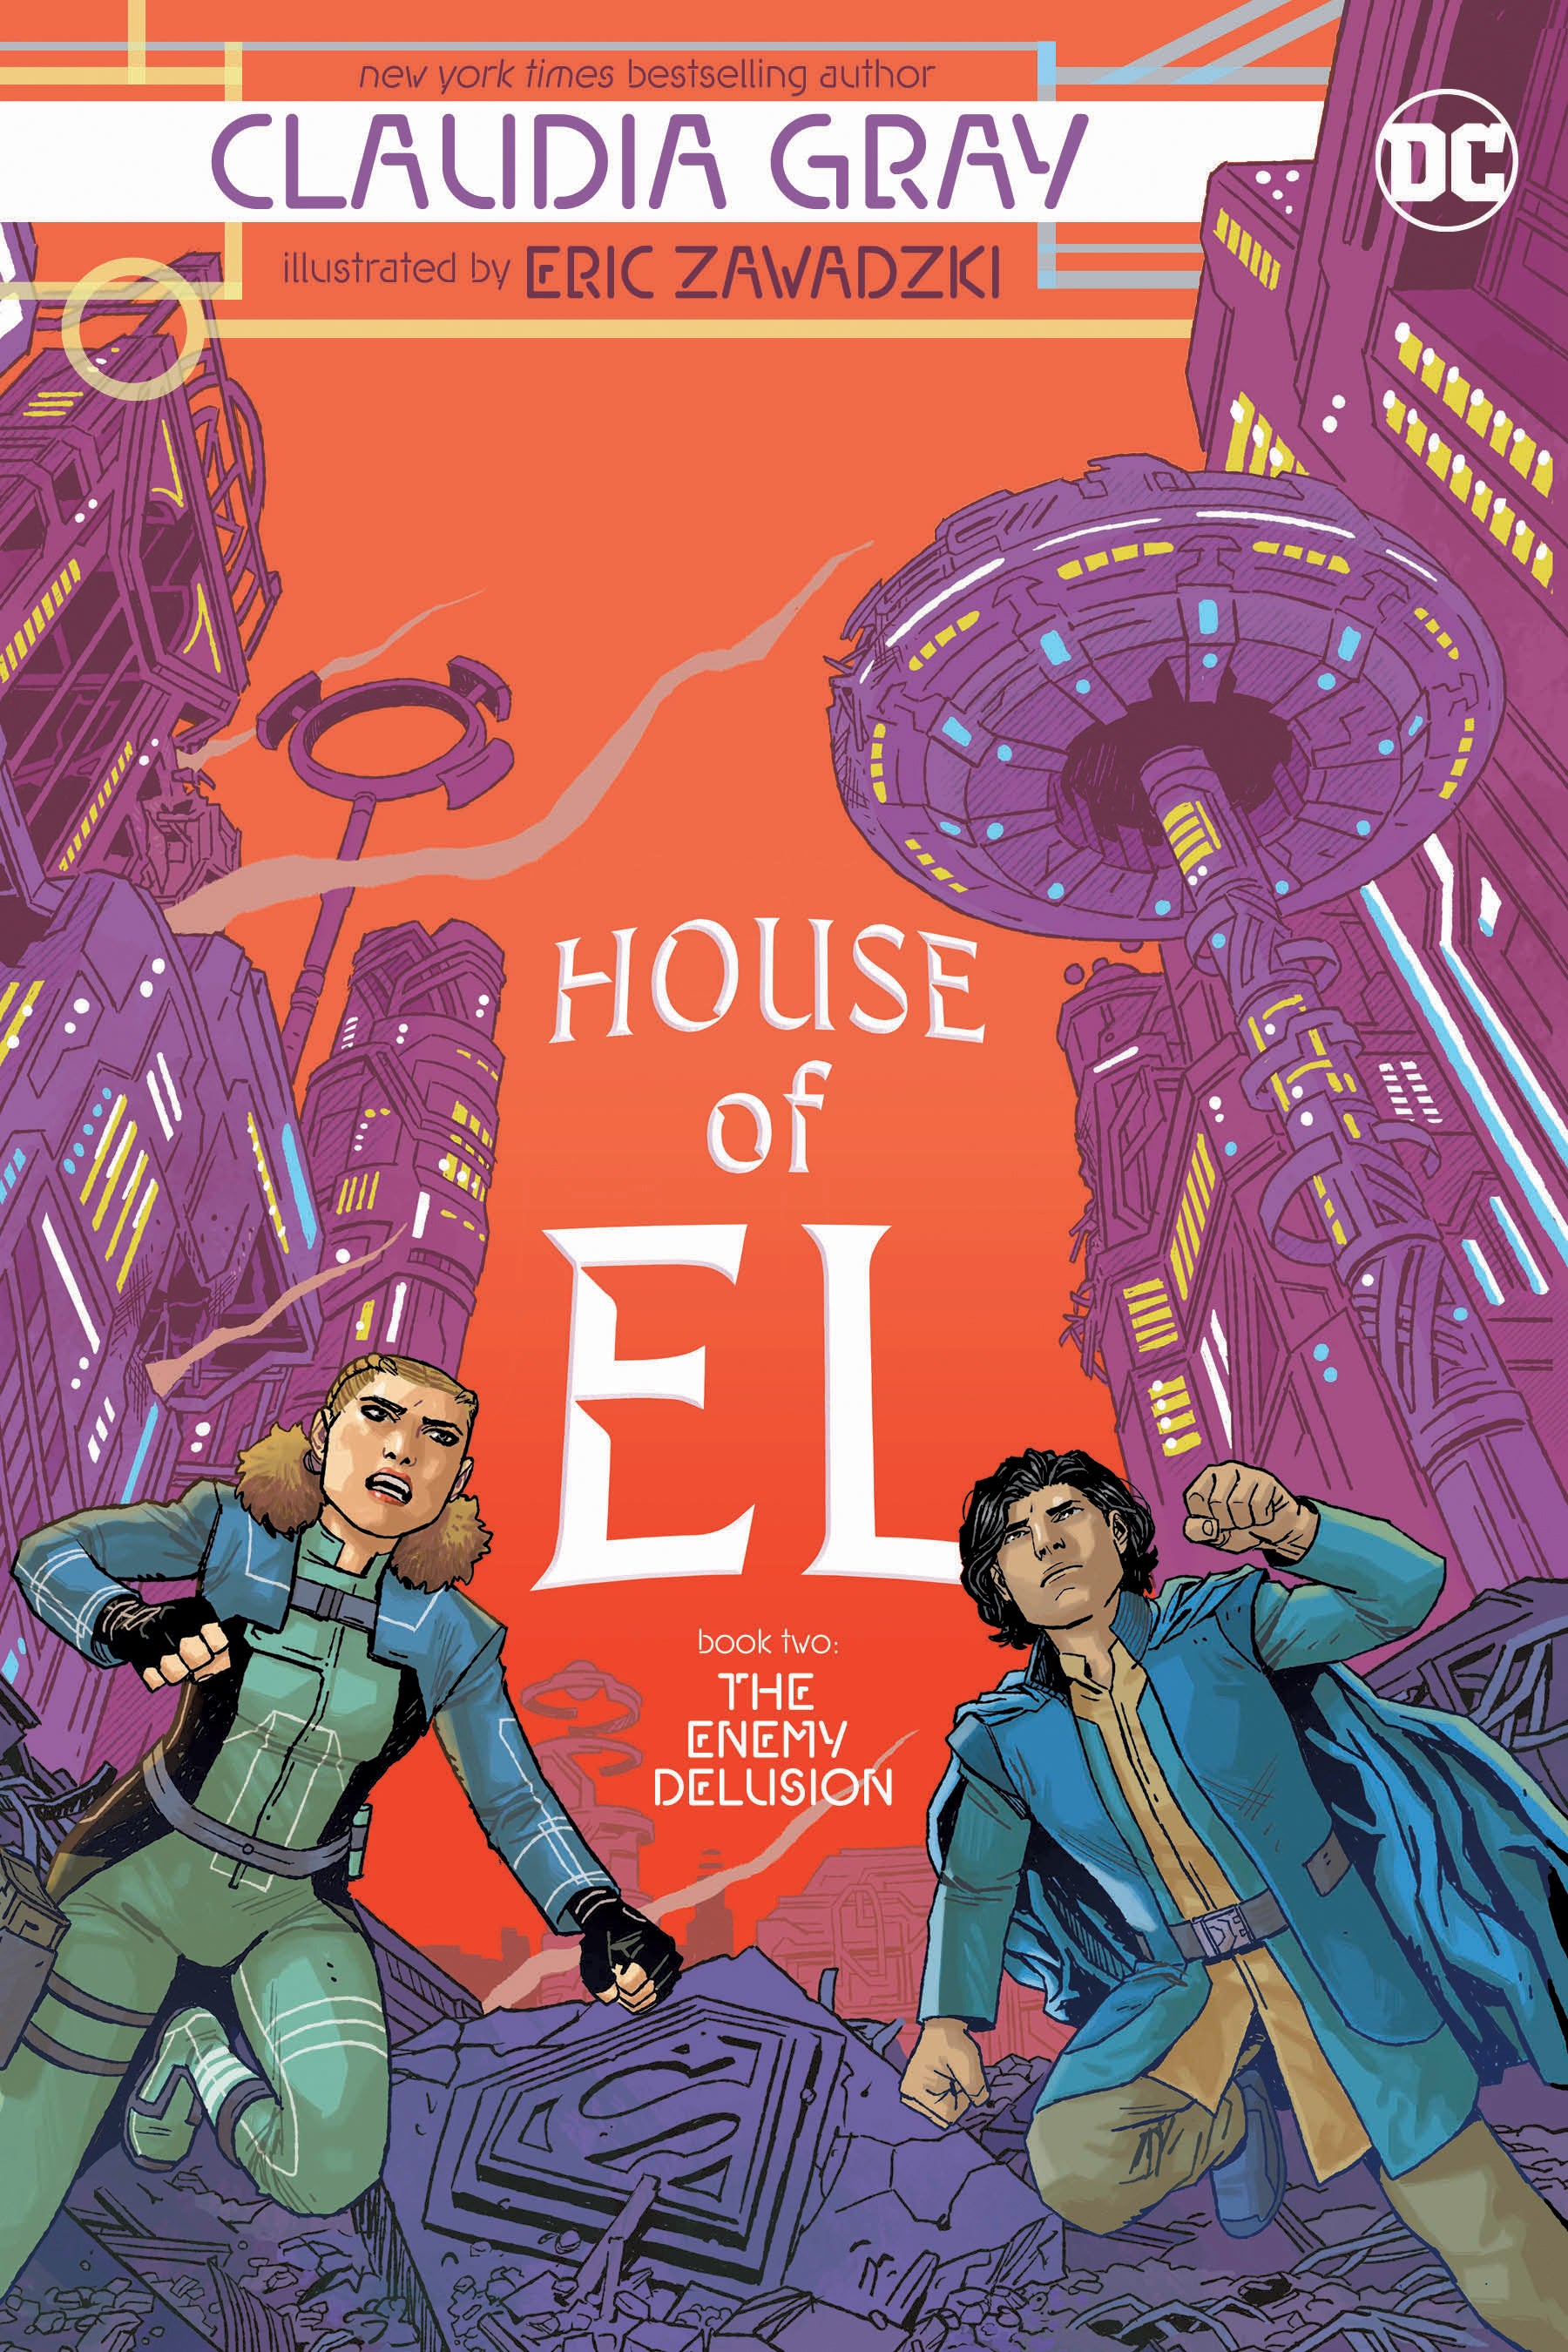 HOUSE OF EL TRADE PAPERBACK BOOK 02 THE ENEMY DELUSION